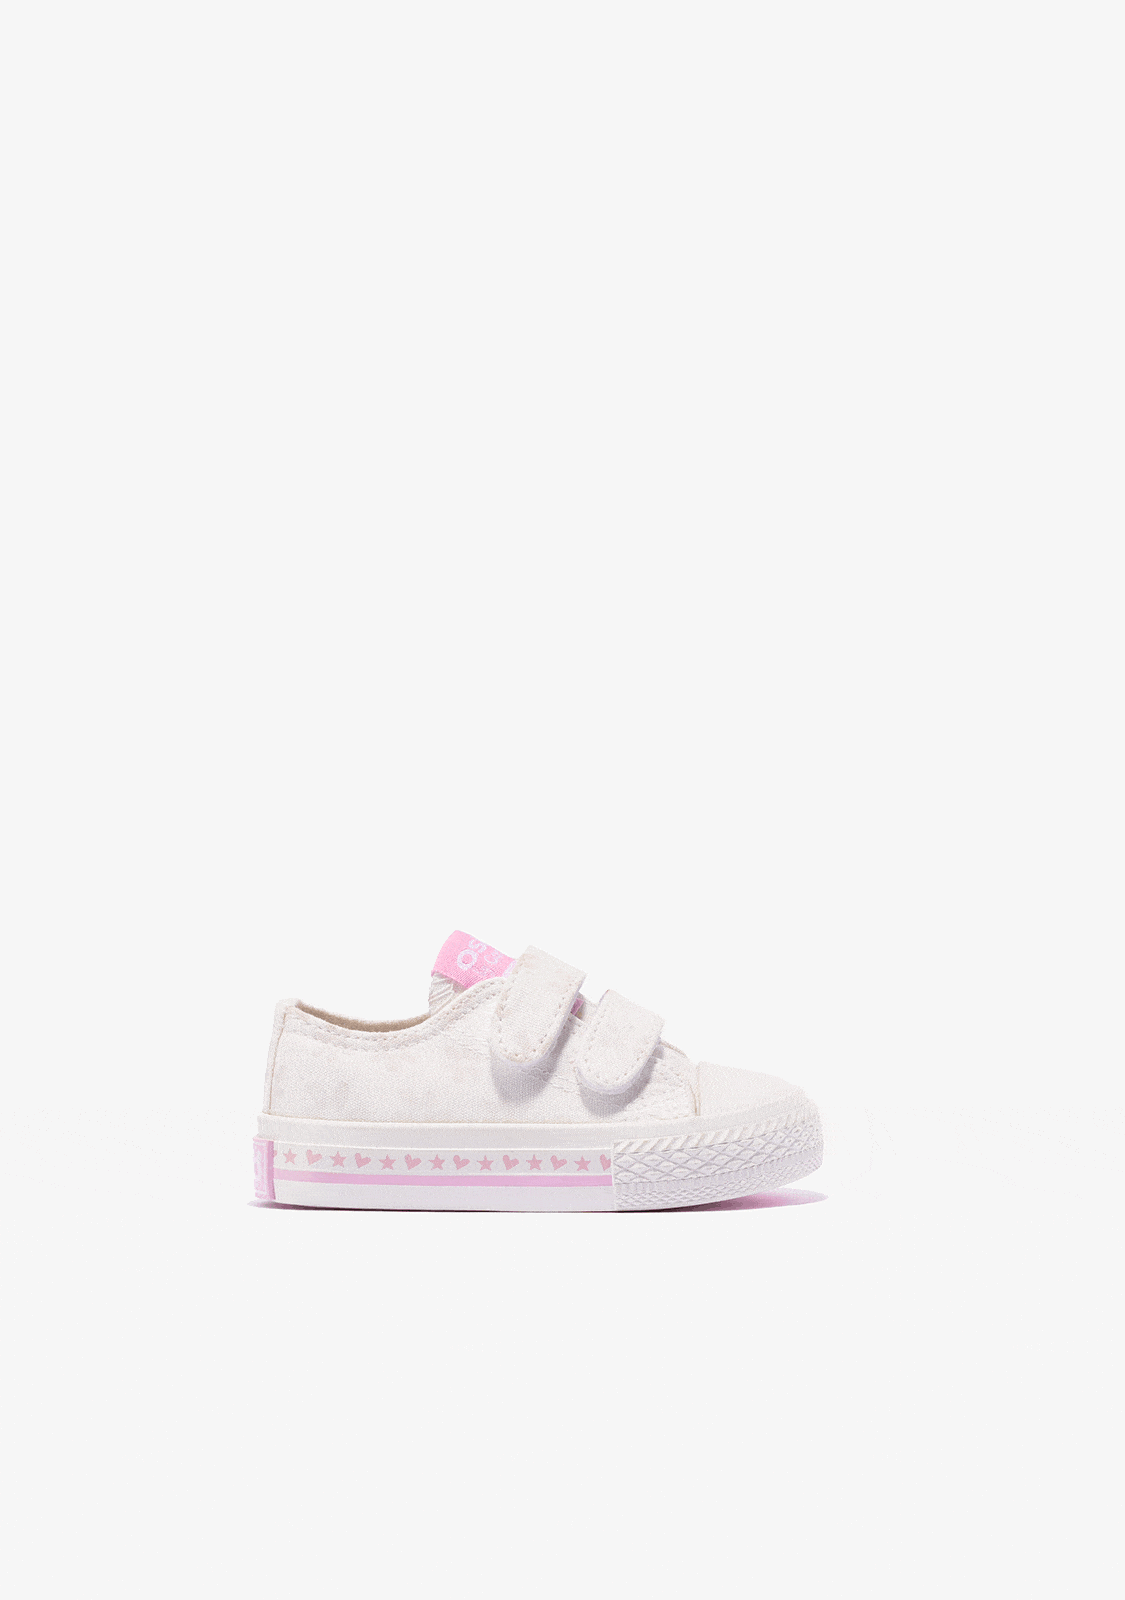 OSITO Shoes Baby's White Solar Sneakers Canvas